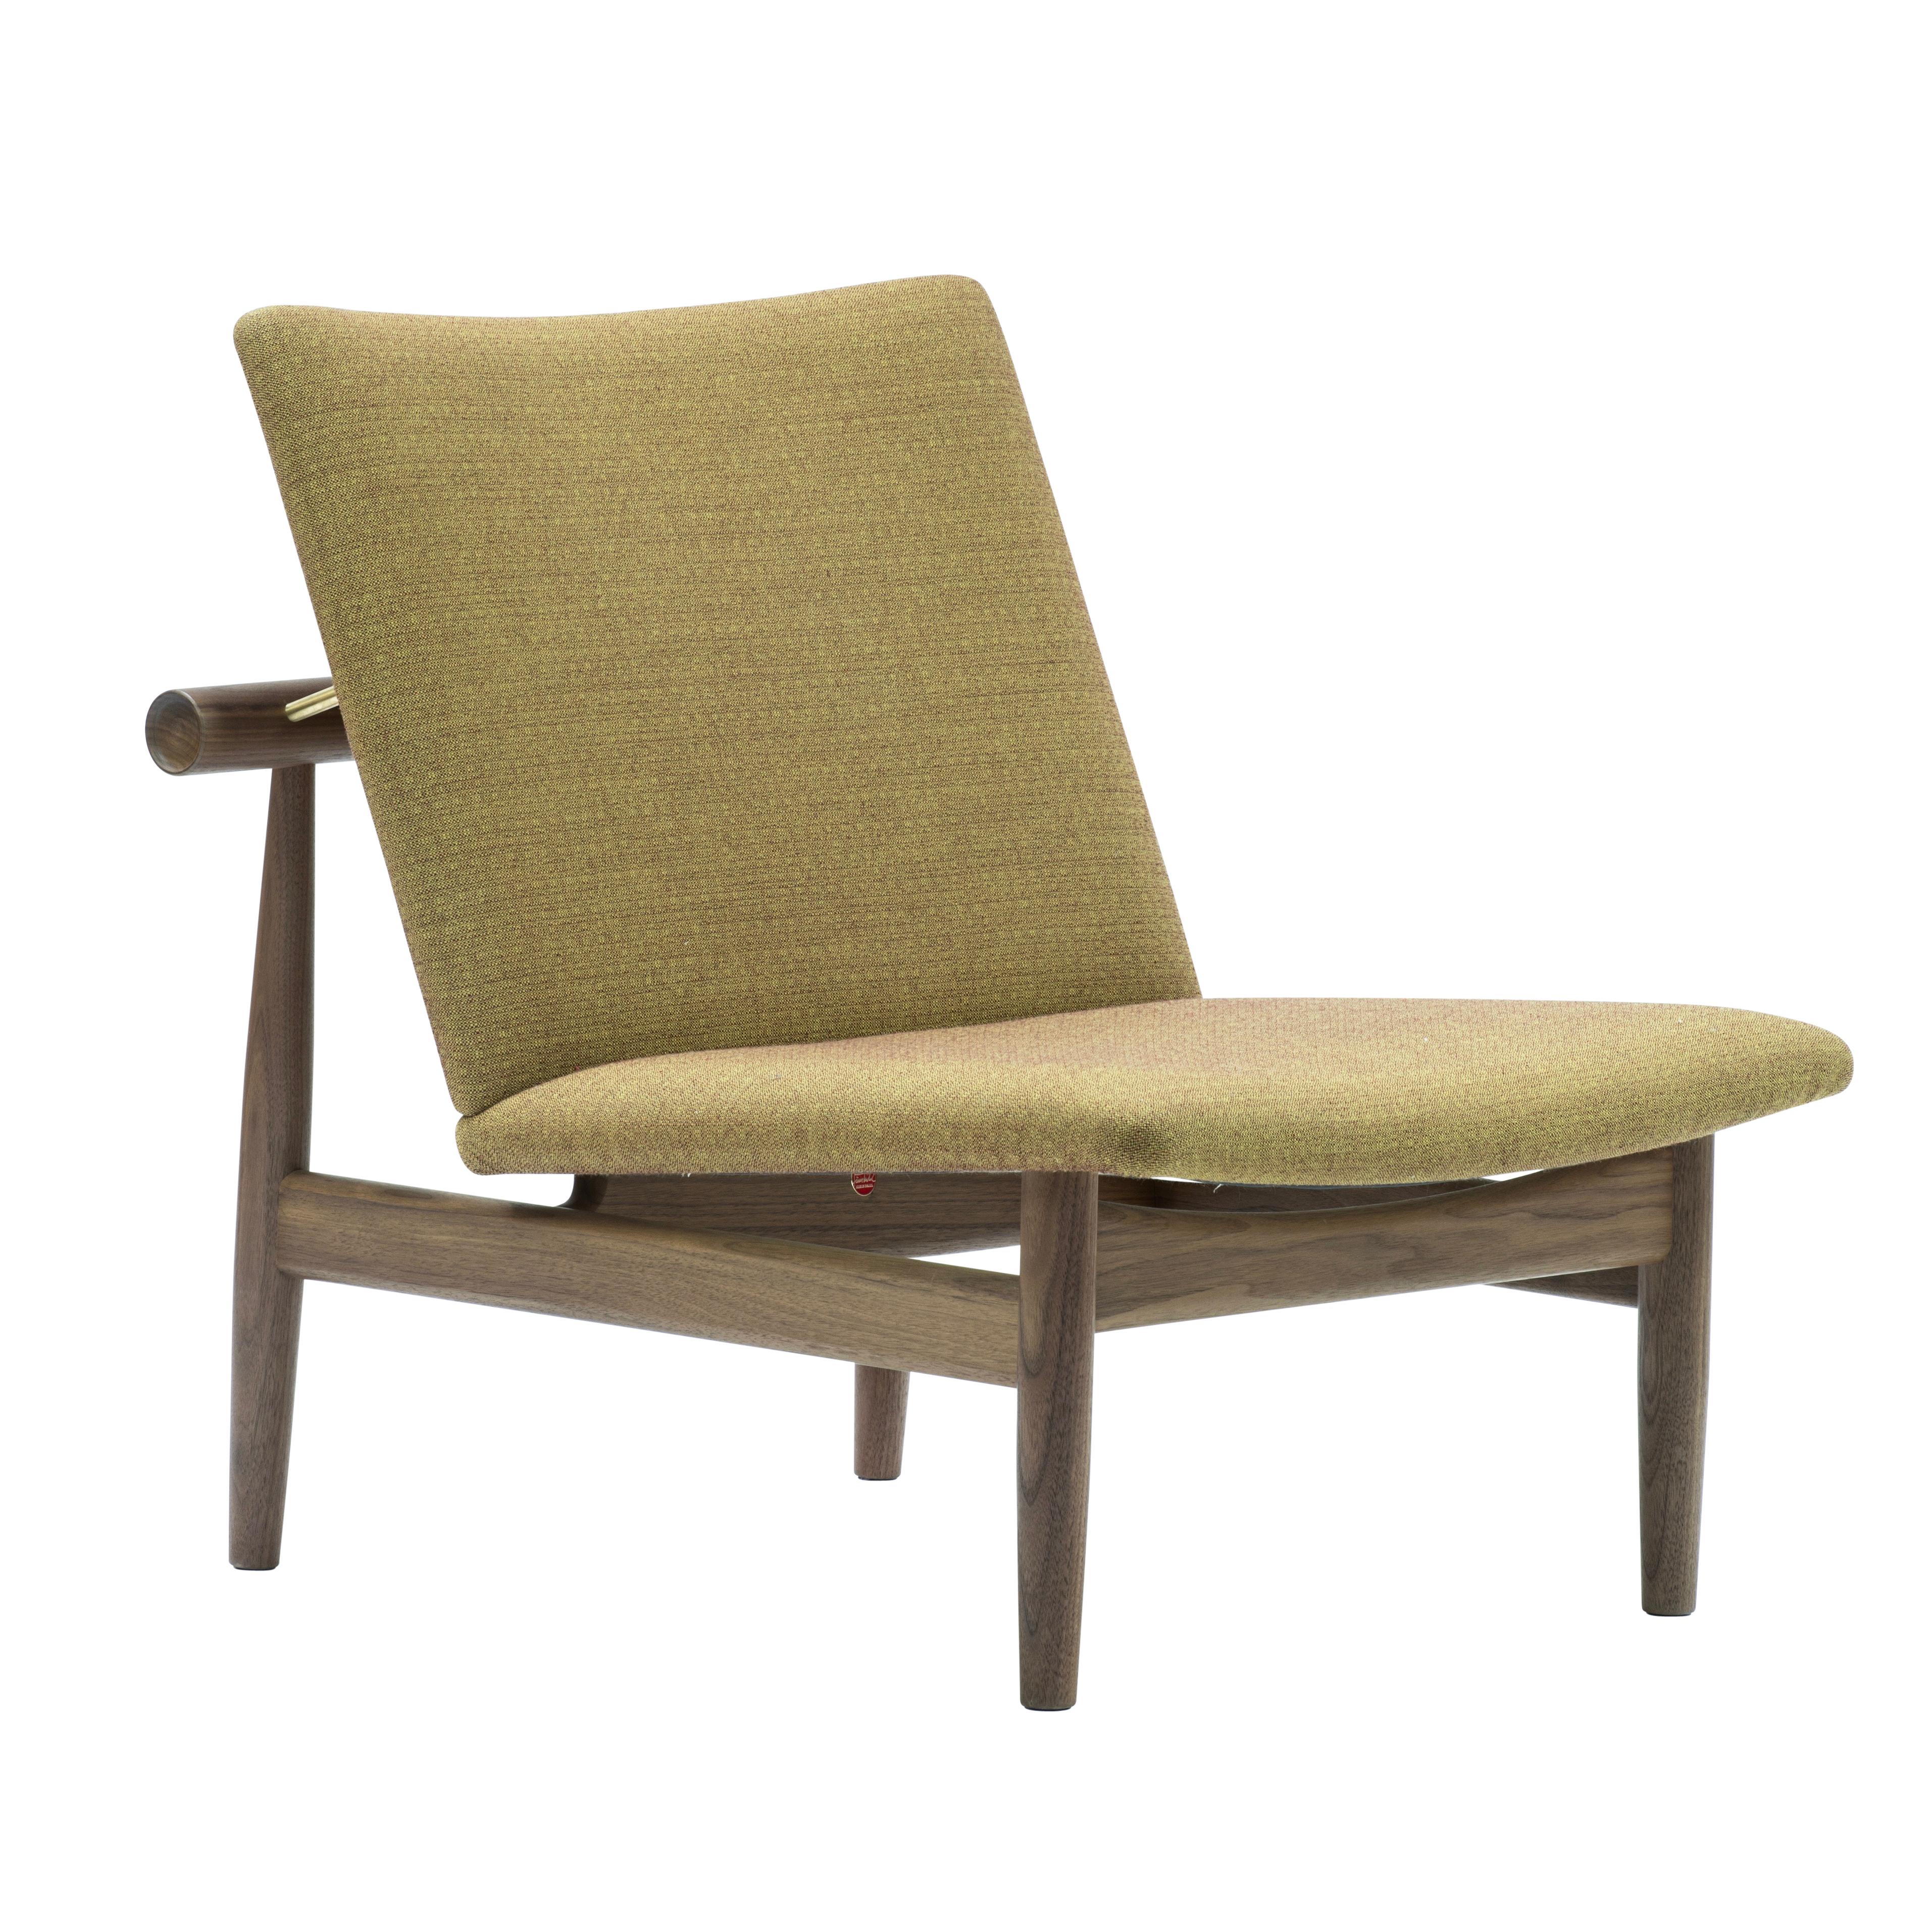 Japan chair designed by Finn Jhul
Manufactured by One collection Finn Juhl (Denmark)

The Japan Series is produced in oak or walnut with handsewn upholstery in fabric.

1953, relaunched in 2007

Frame: walnut
Upholstery: Fabric Kvadrat Foss

Size: W